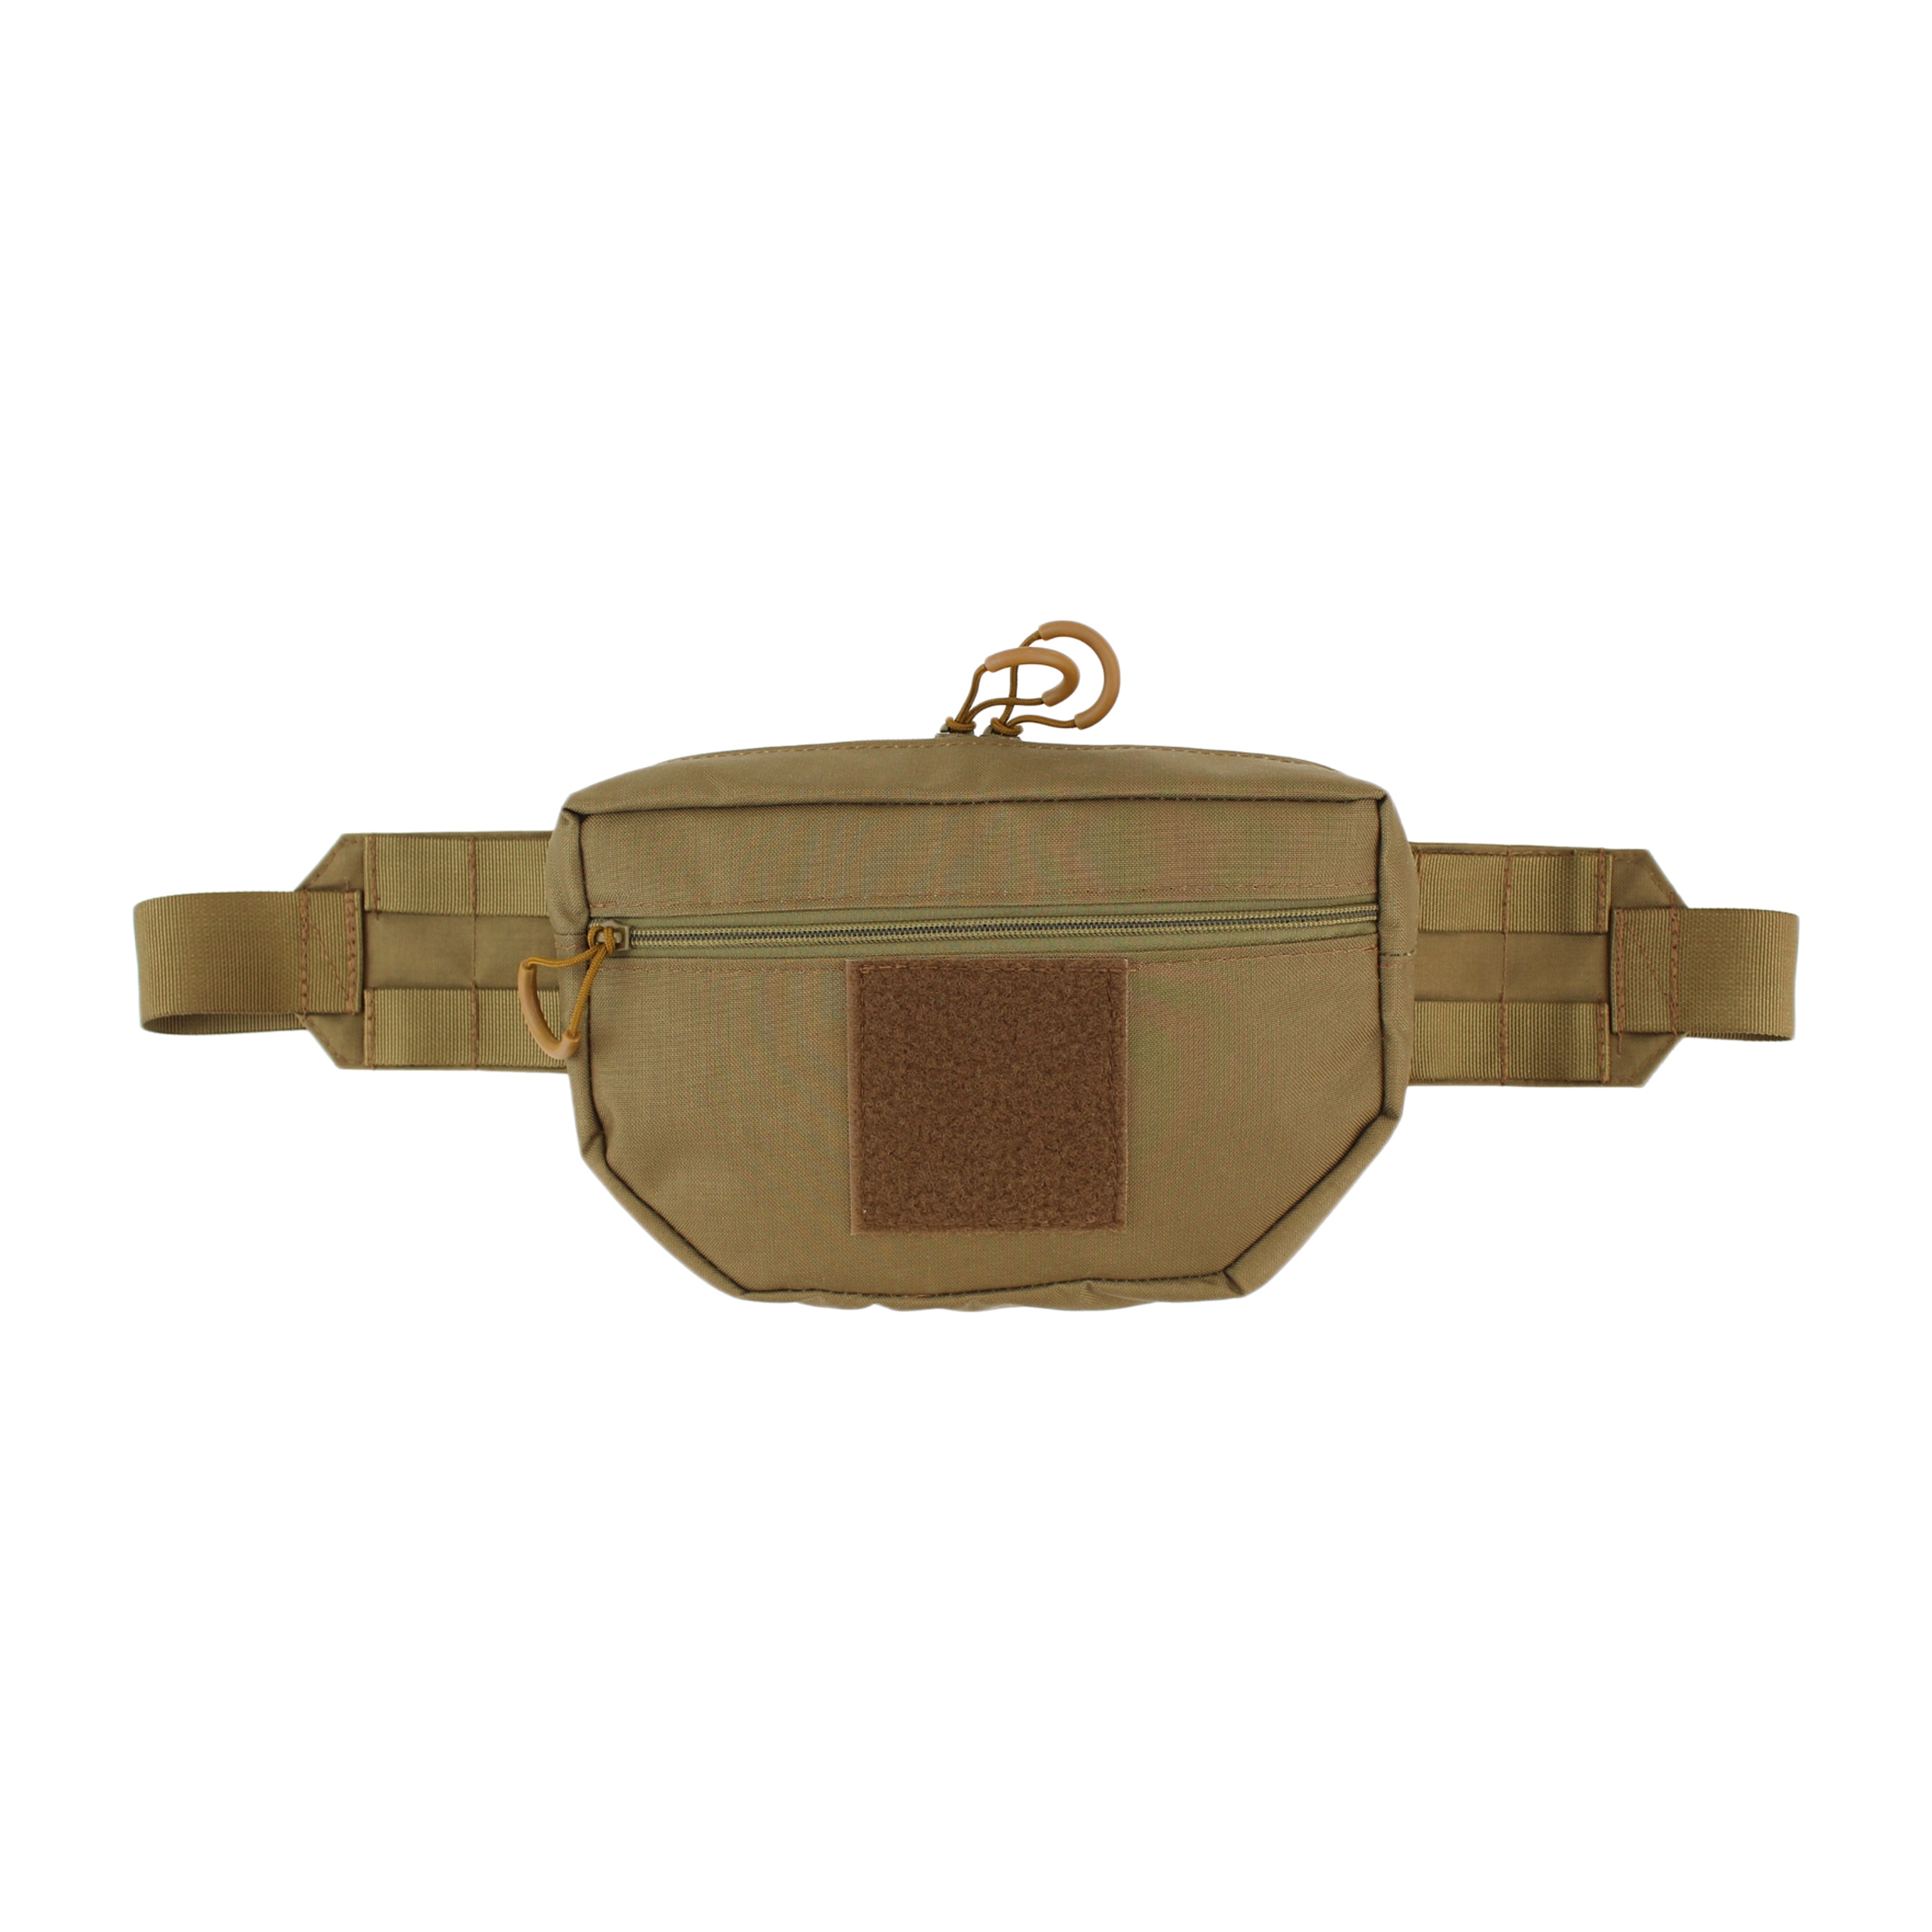 Purchase the Zentauron Waist Pouch EDC coyote by ASMC